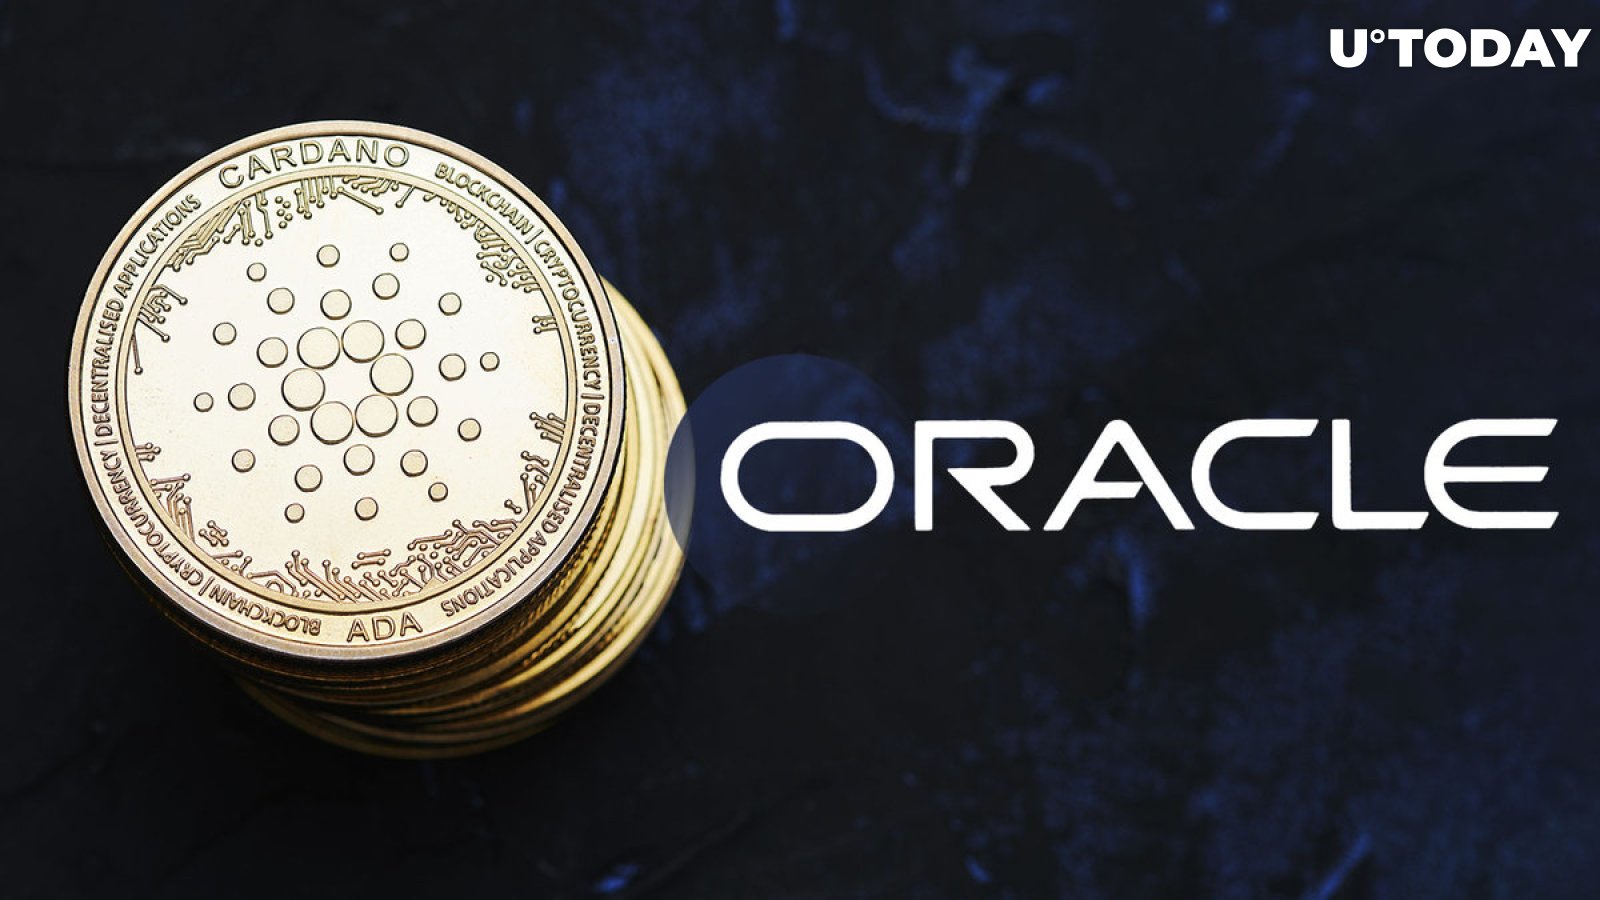 Cardano (ADA) Records Its First Oracle Integration Through Liqwid: Details